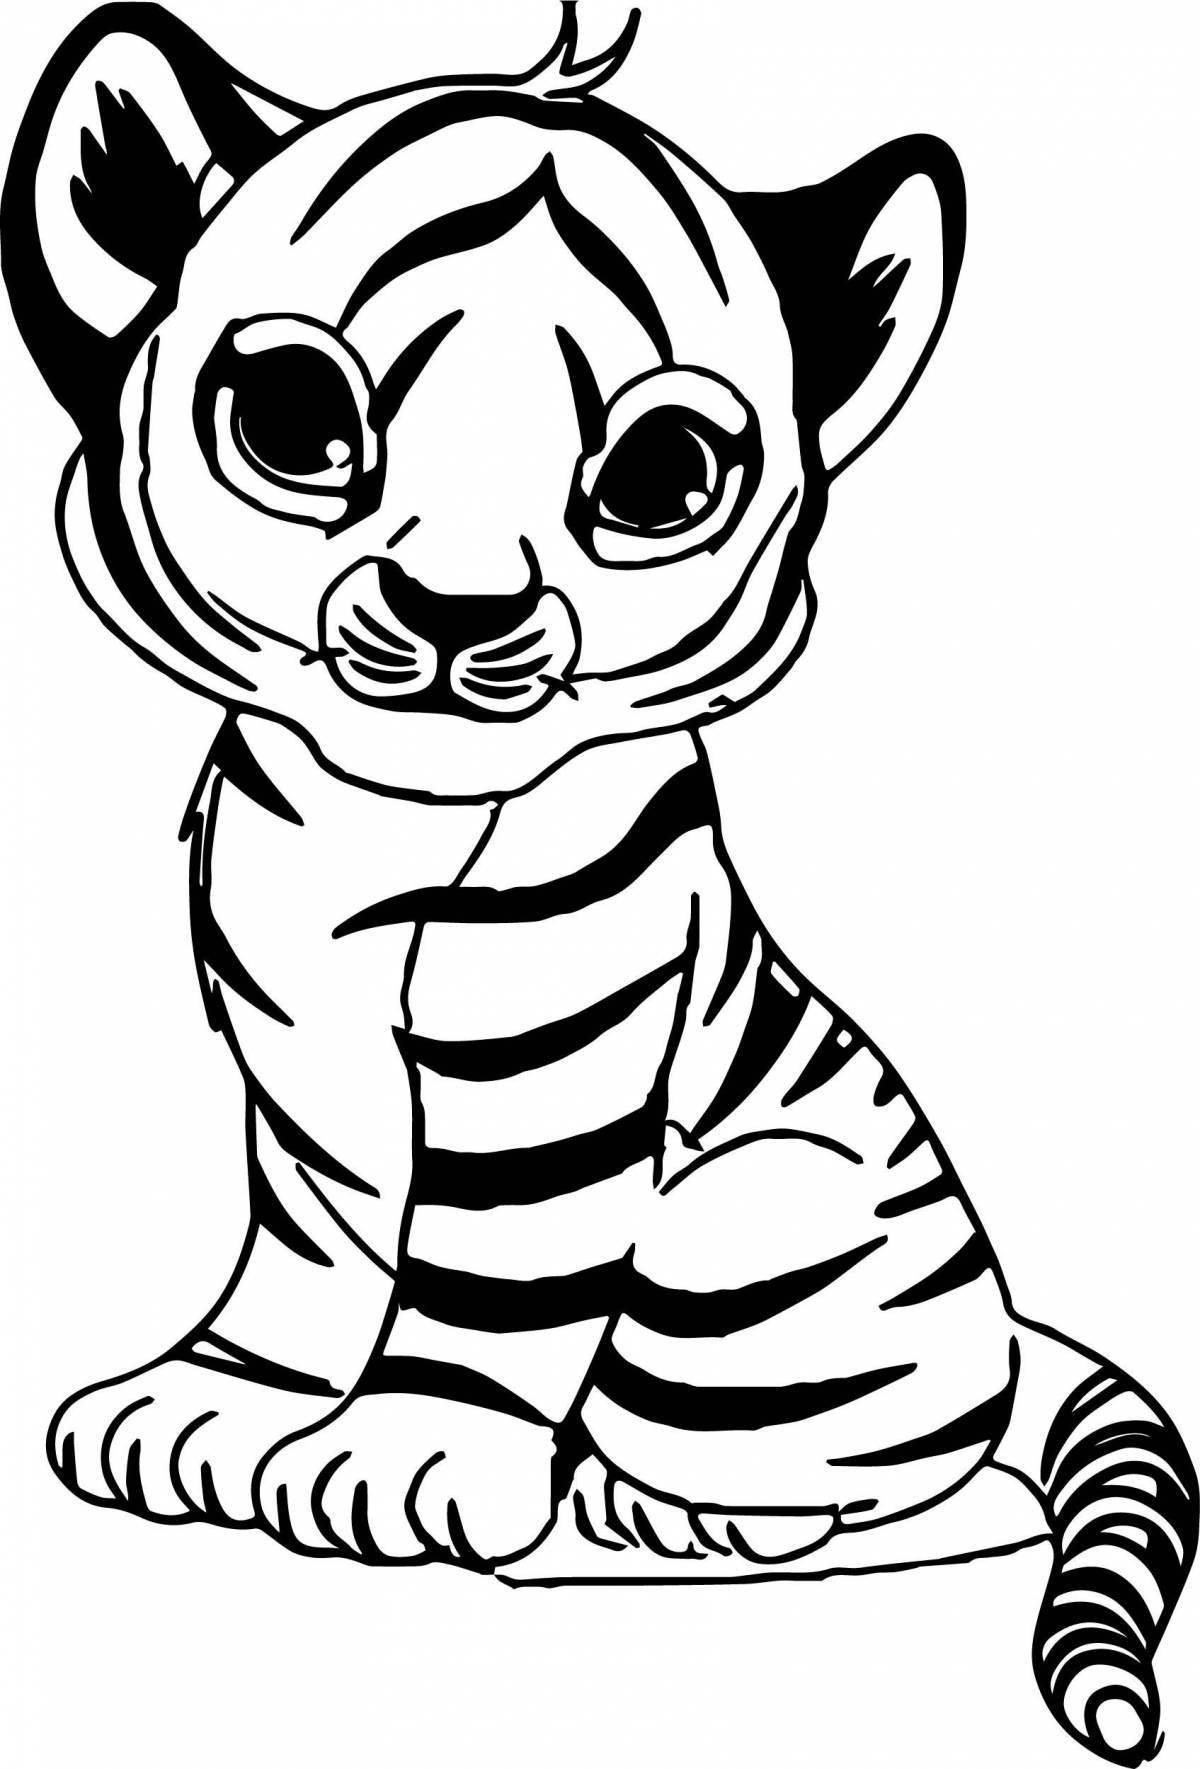 Tiger bright coloring book for 3-4 year olds